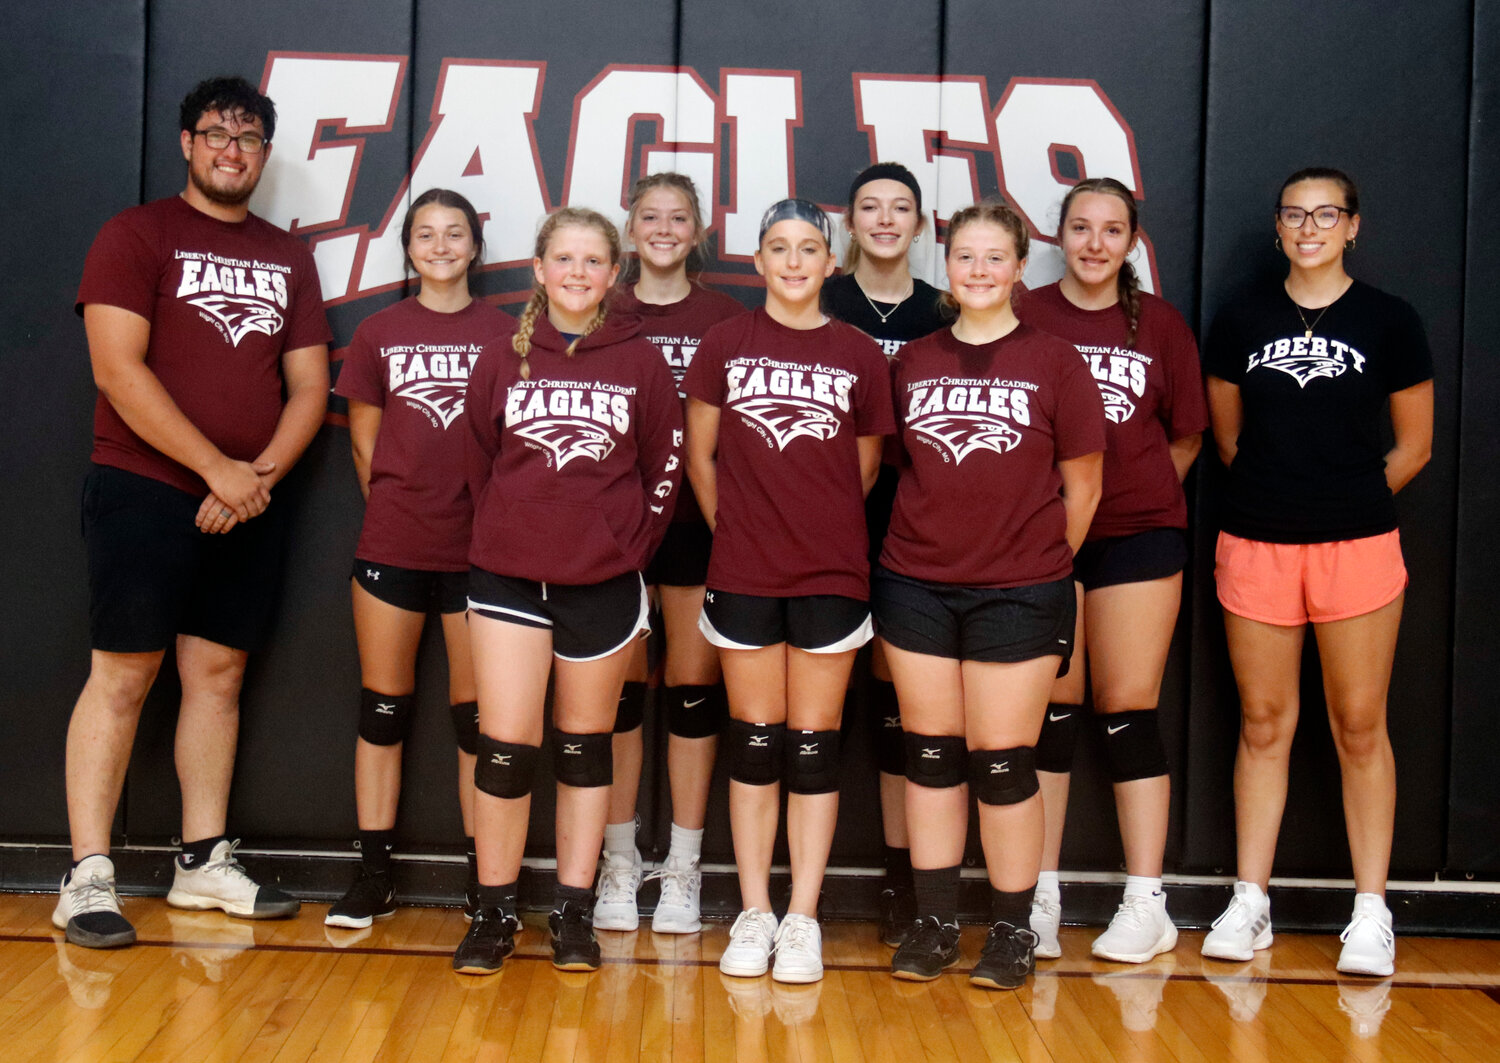 Members of the Liberty Christian Academy volleyball team are, front row, from left: Addi Scheltens, Emma Woodson, Trina Scheltens. Back row, from left: Head Coach Dakota Ball, Raelee Bruno, Andreanna Scheltens, Jubilee Nowlan, Caroline Keller, Assistant Coach Gracie Foran.